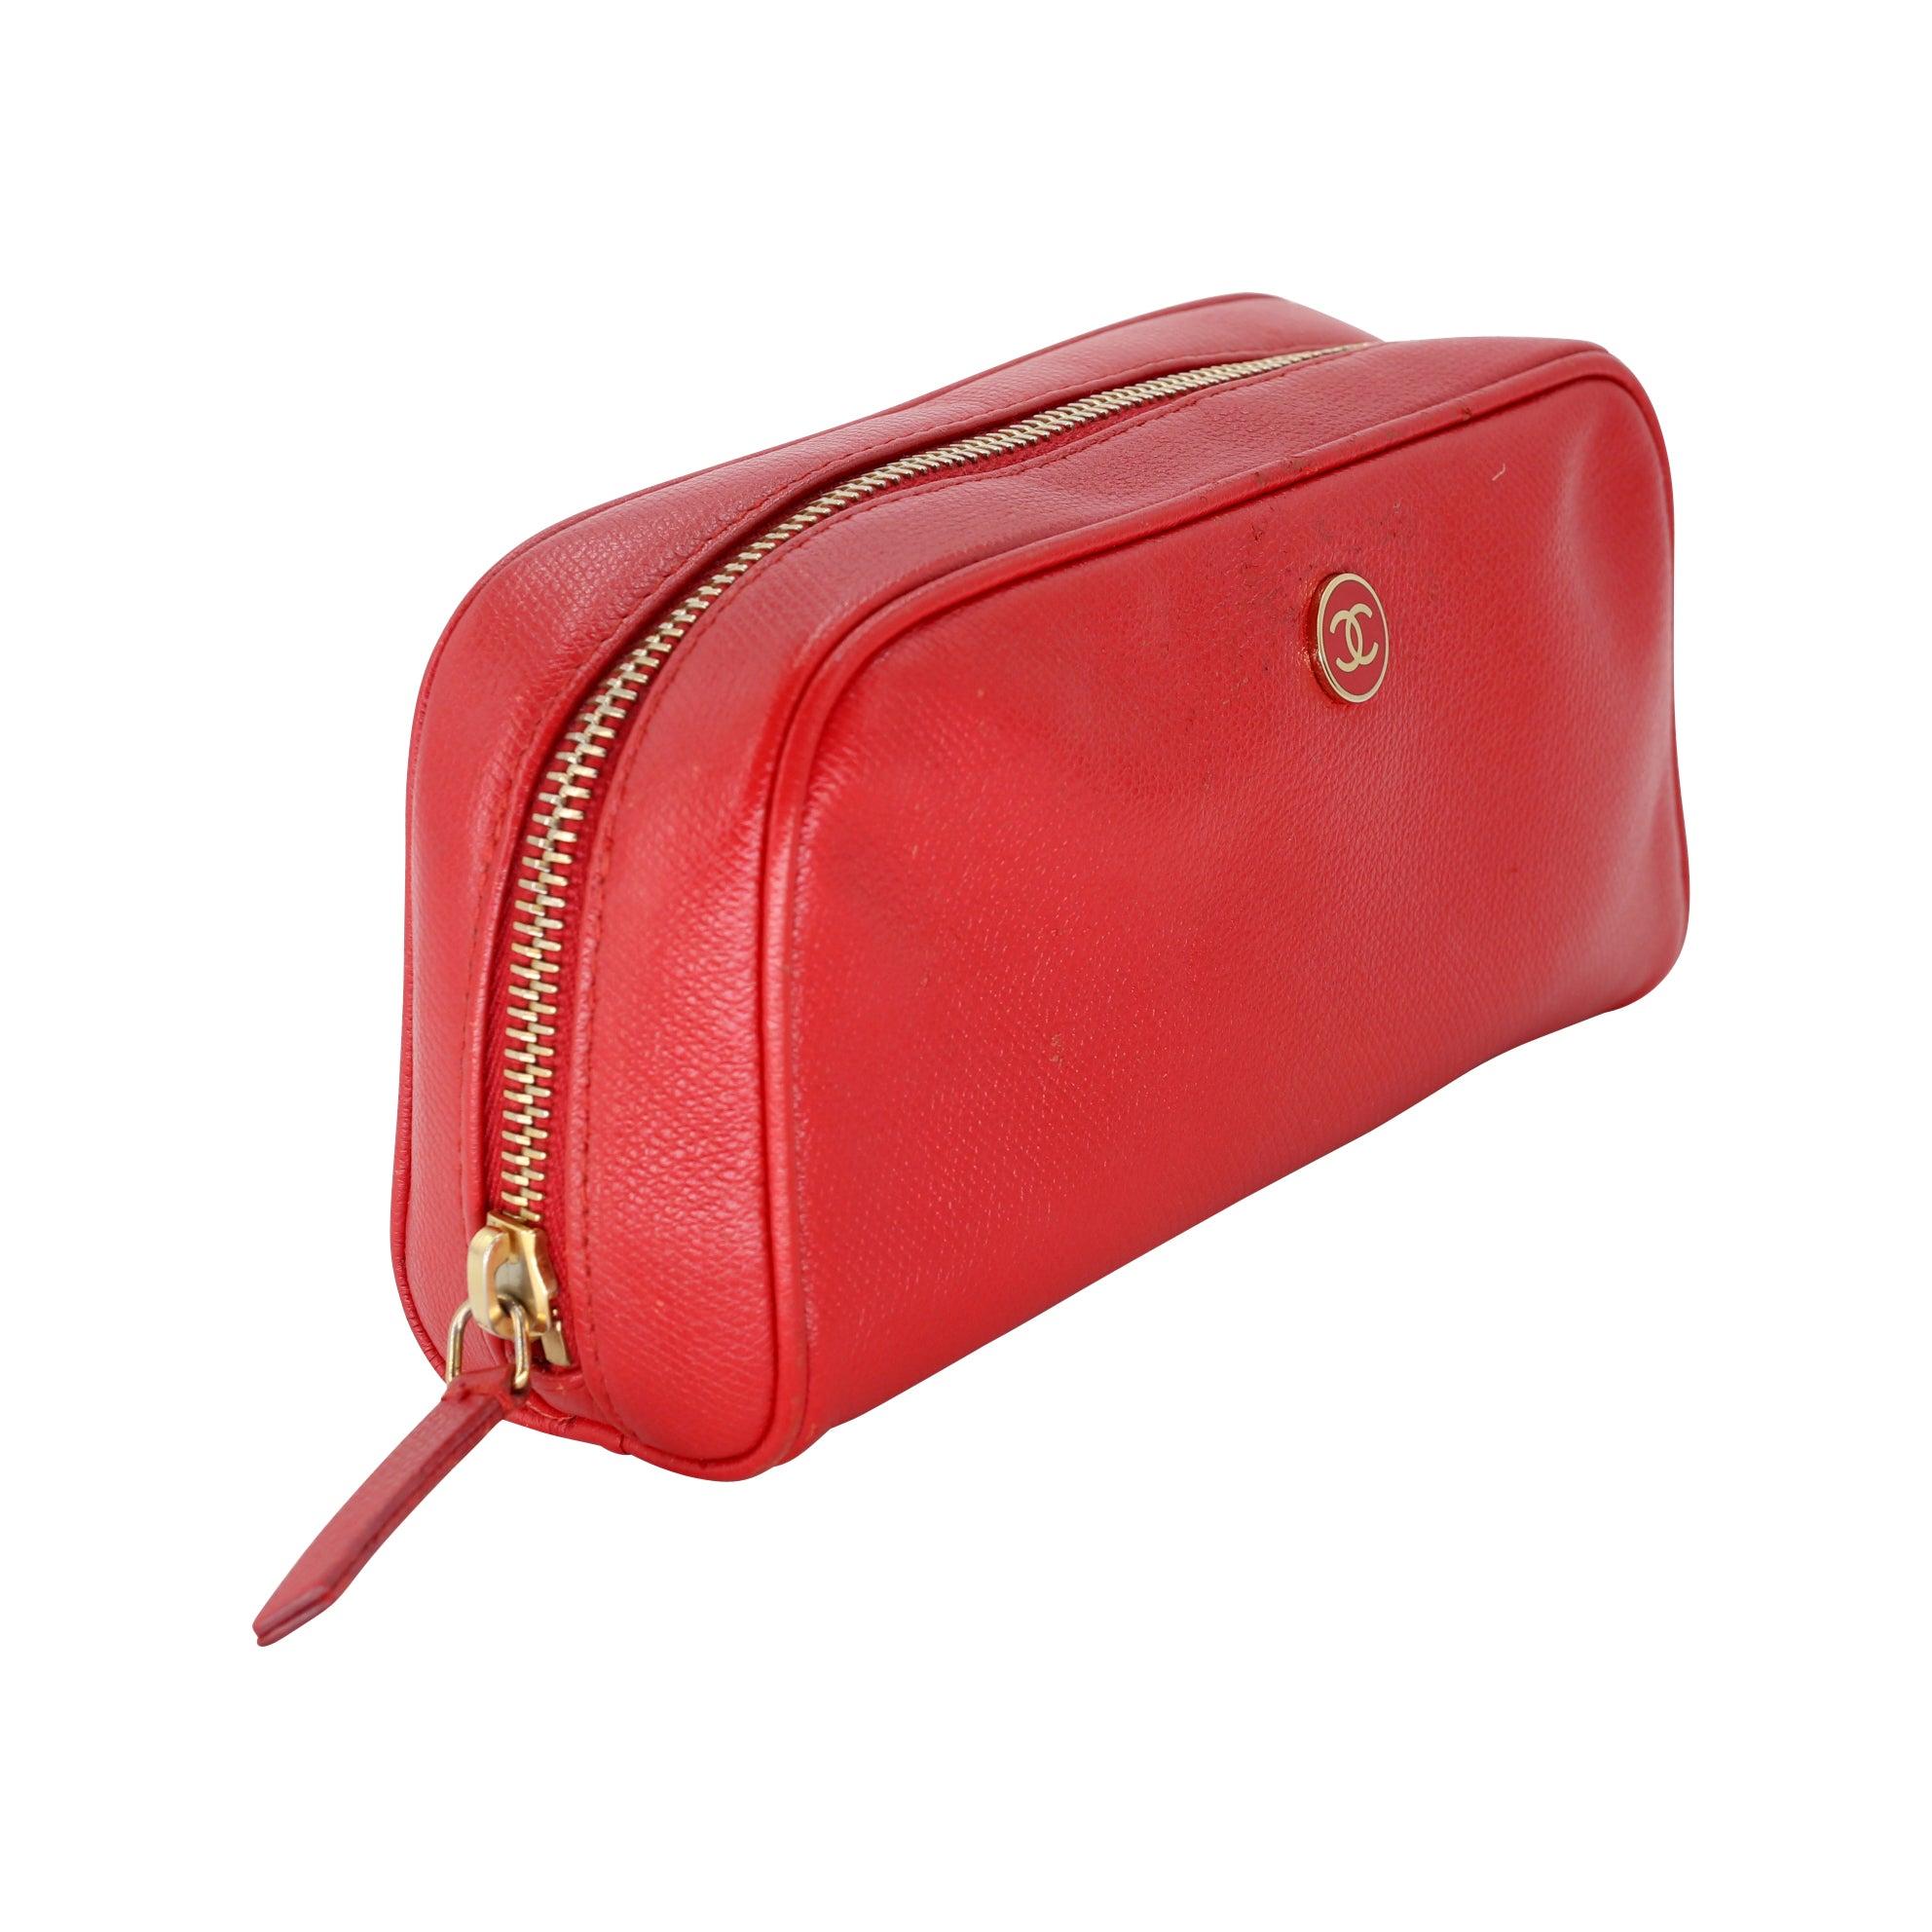 This Magnificent red Chanel travel make up bag bag includes signature caviar leather exterior with CC monogram on the front hardware interior includes CC monogram stamped all around. The travel makeup bag is perfect for daily use or any overnight